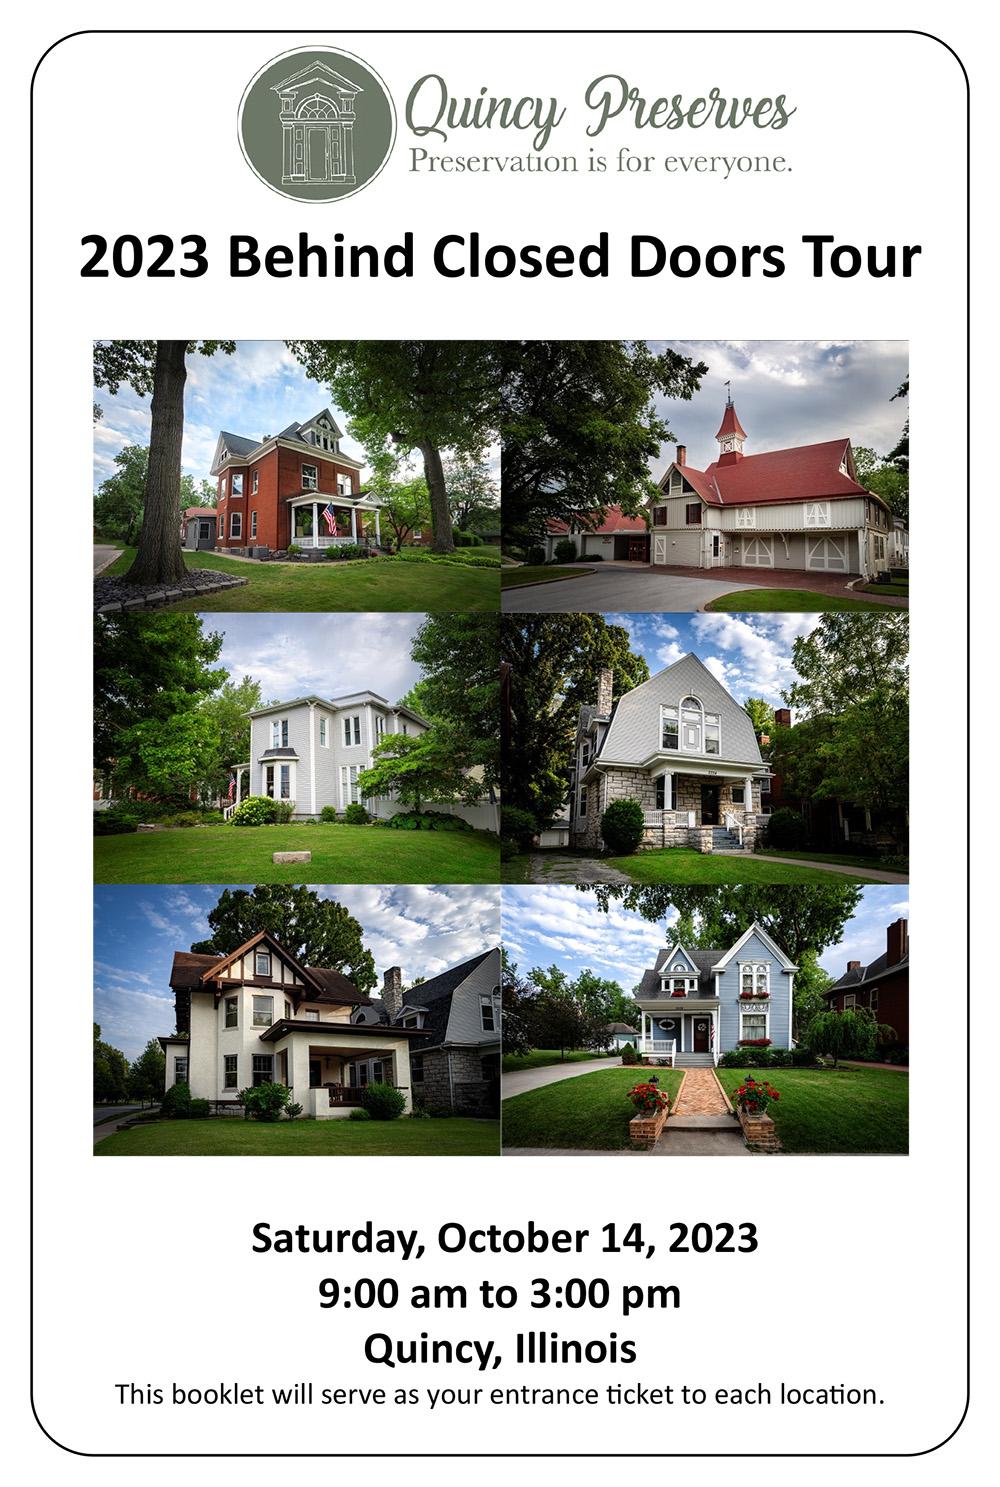 View 2023 Behind Closed Doors Tour Booklet